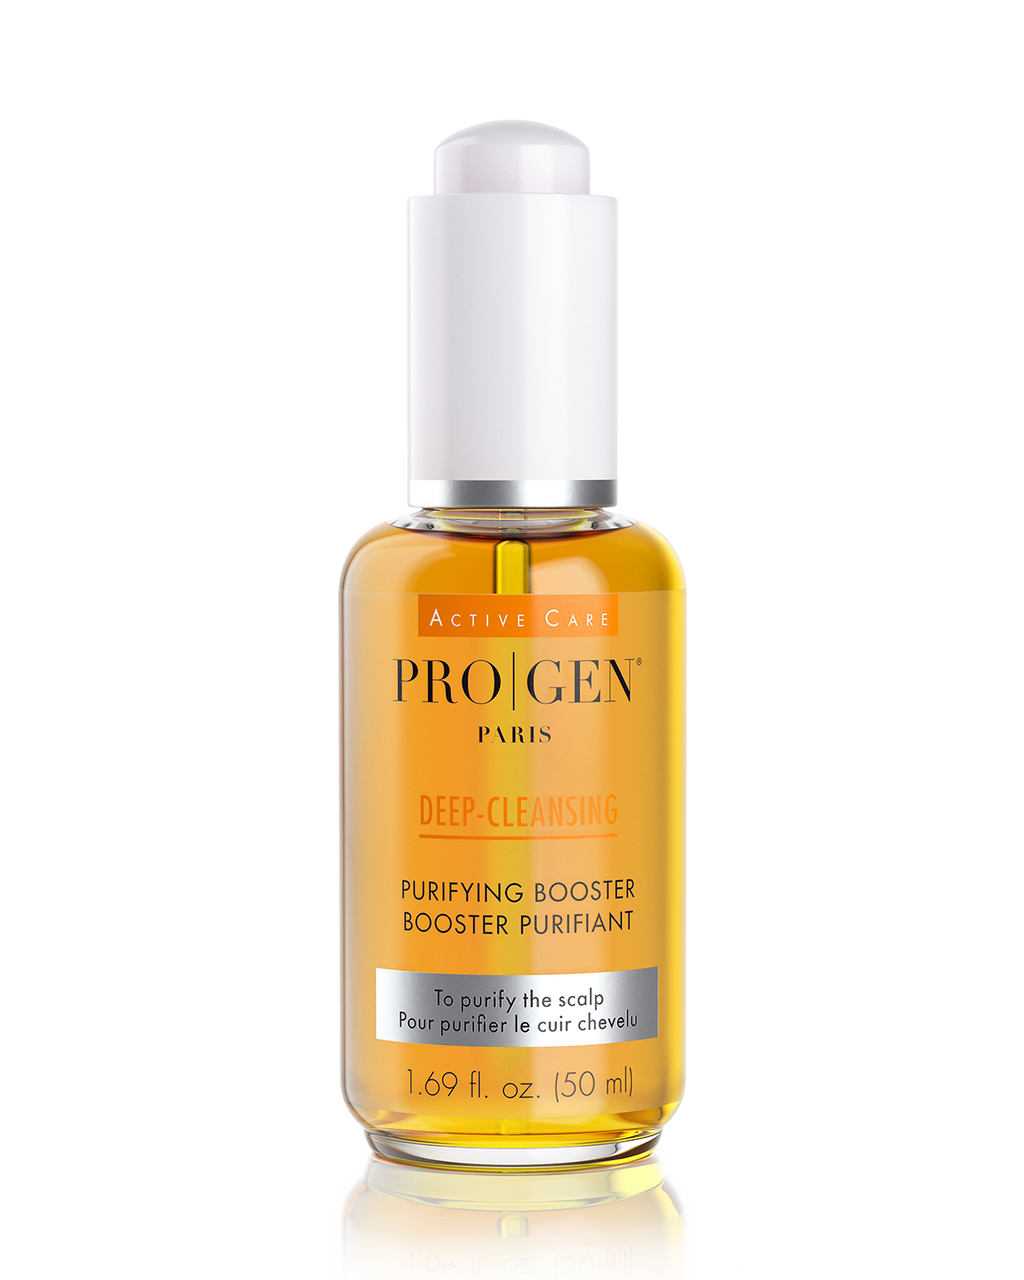 Deep-Cleansing Purifying Booster for Dry, Flaky Scalp